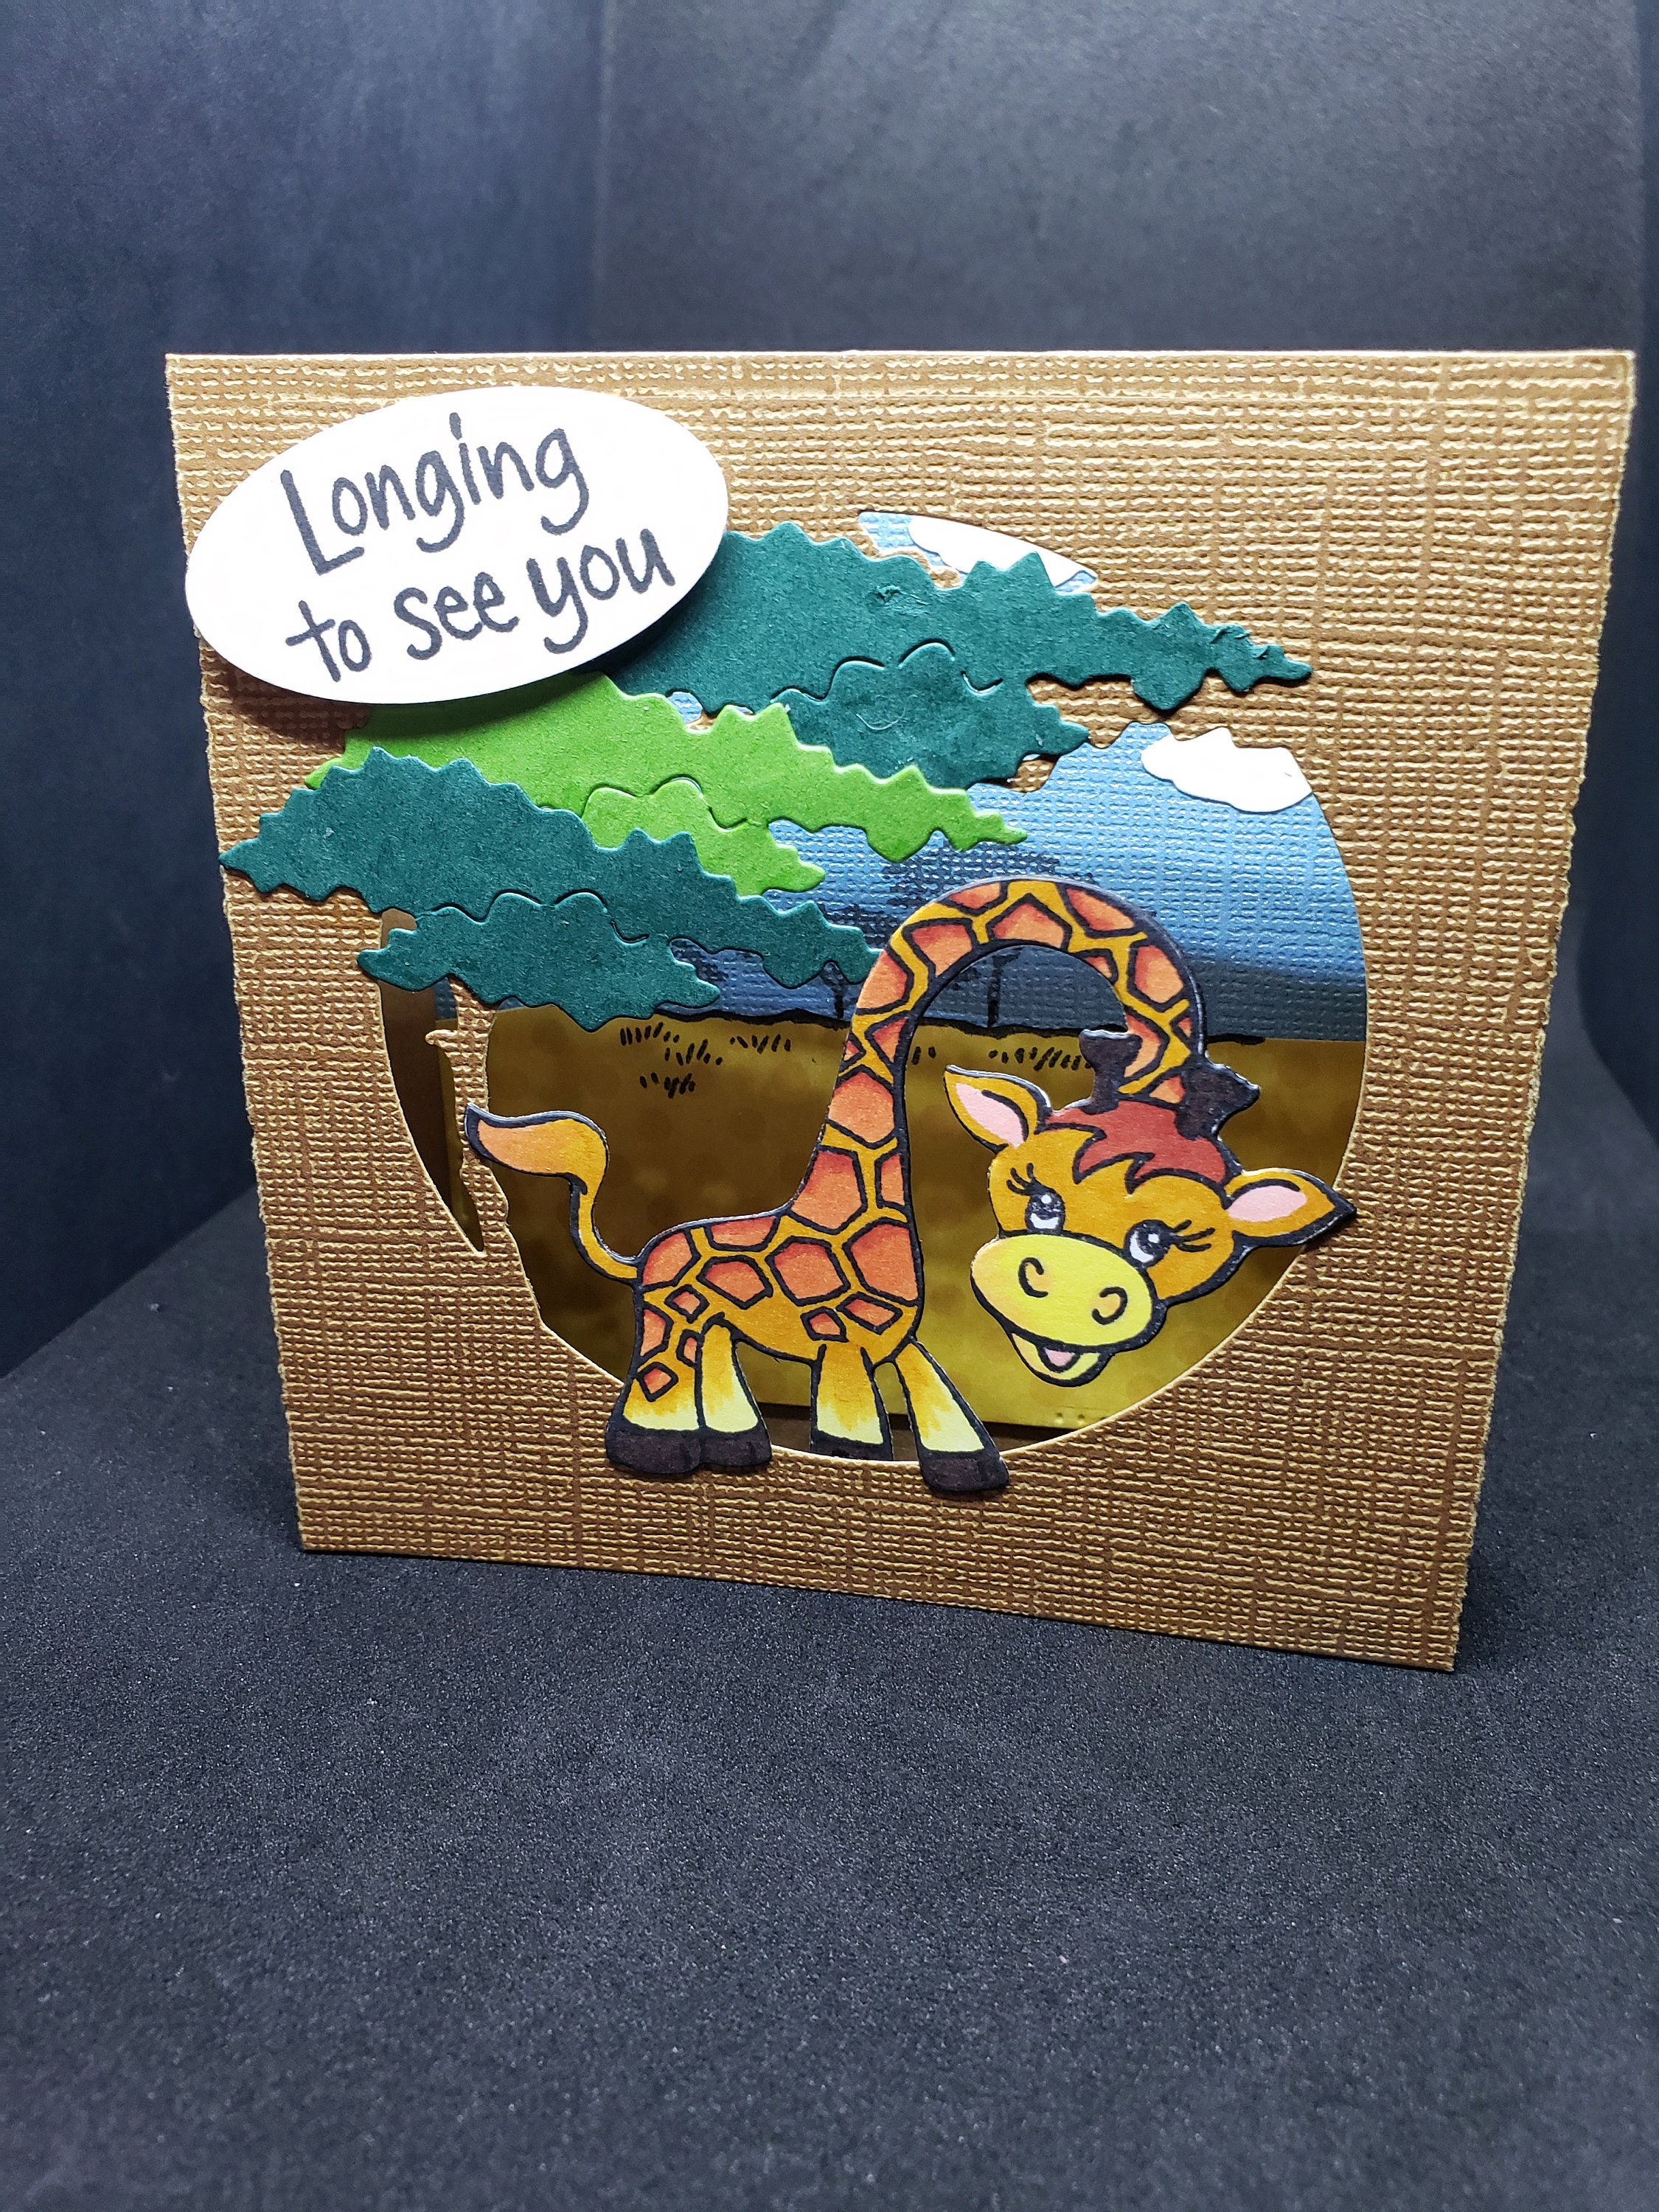 A Shaker Card and Envelope with Giraffe Designs and handmade Paper